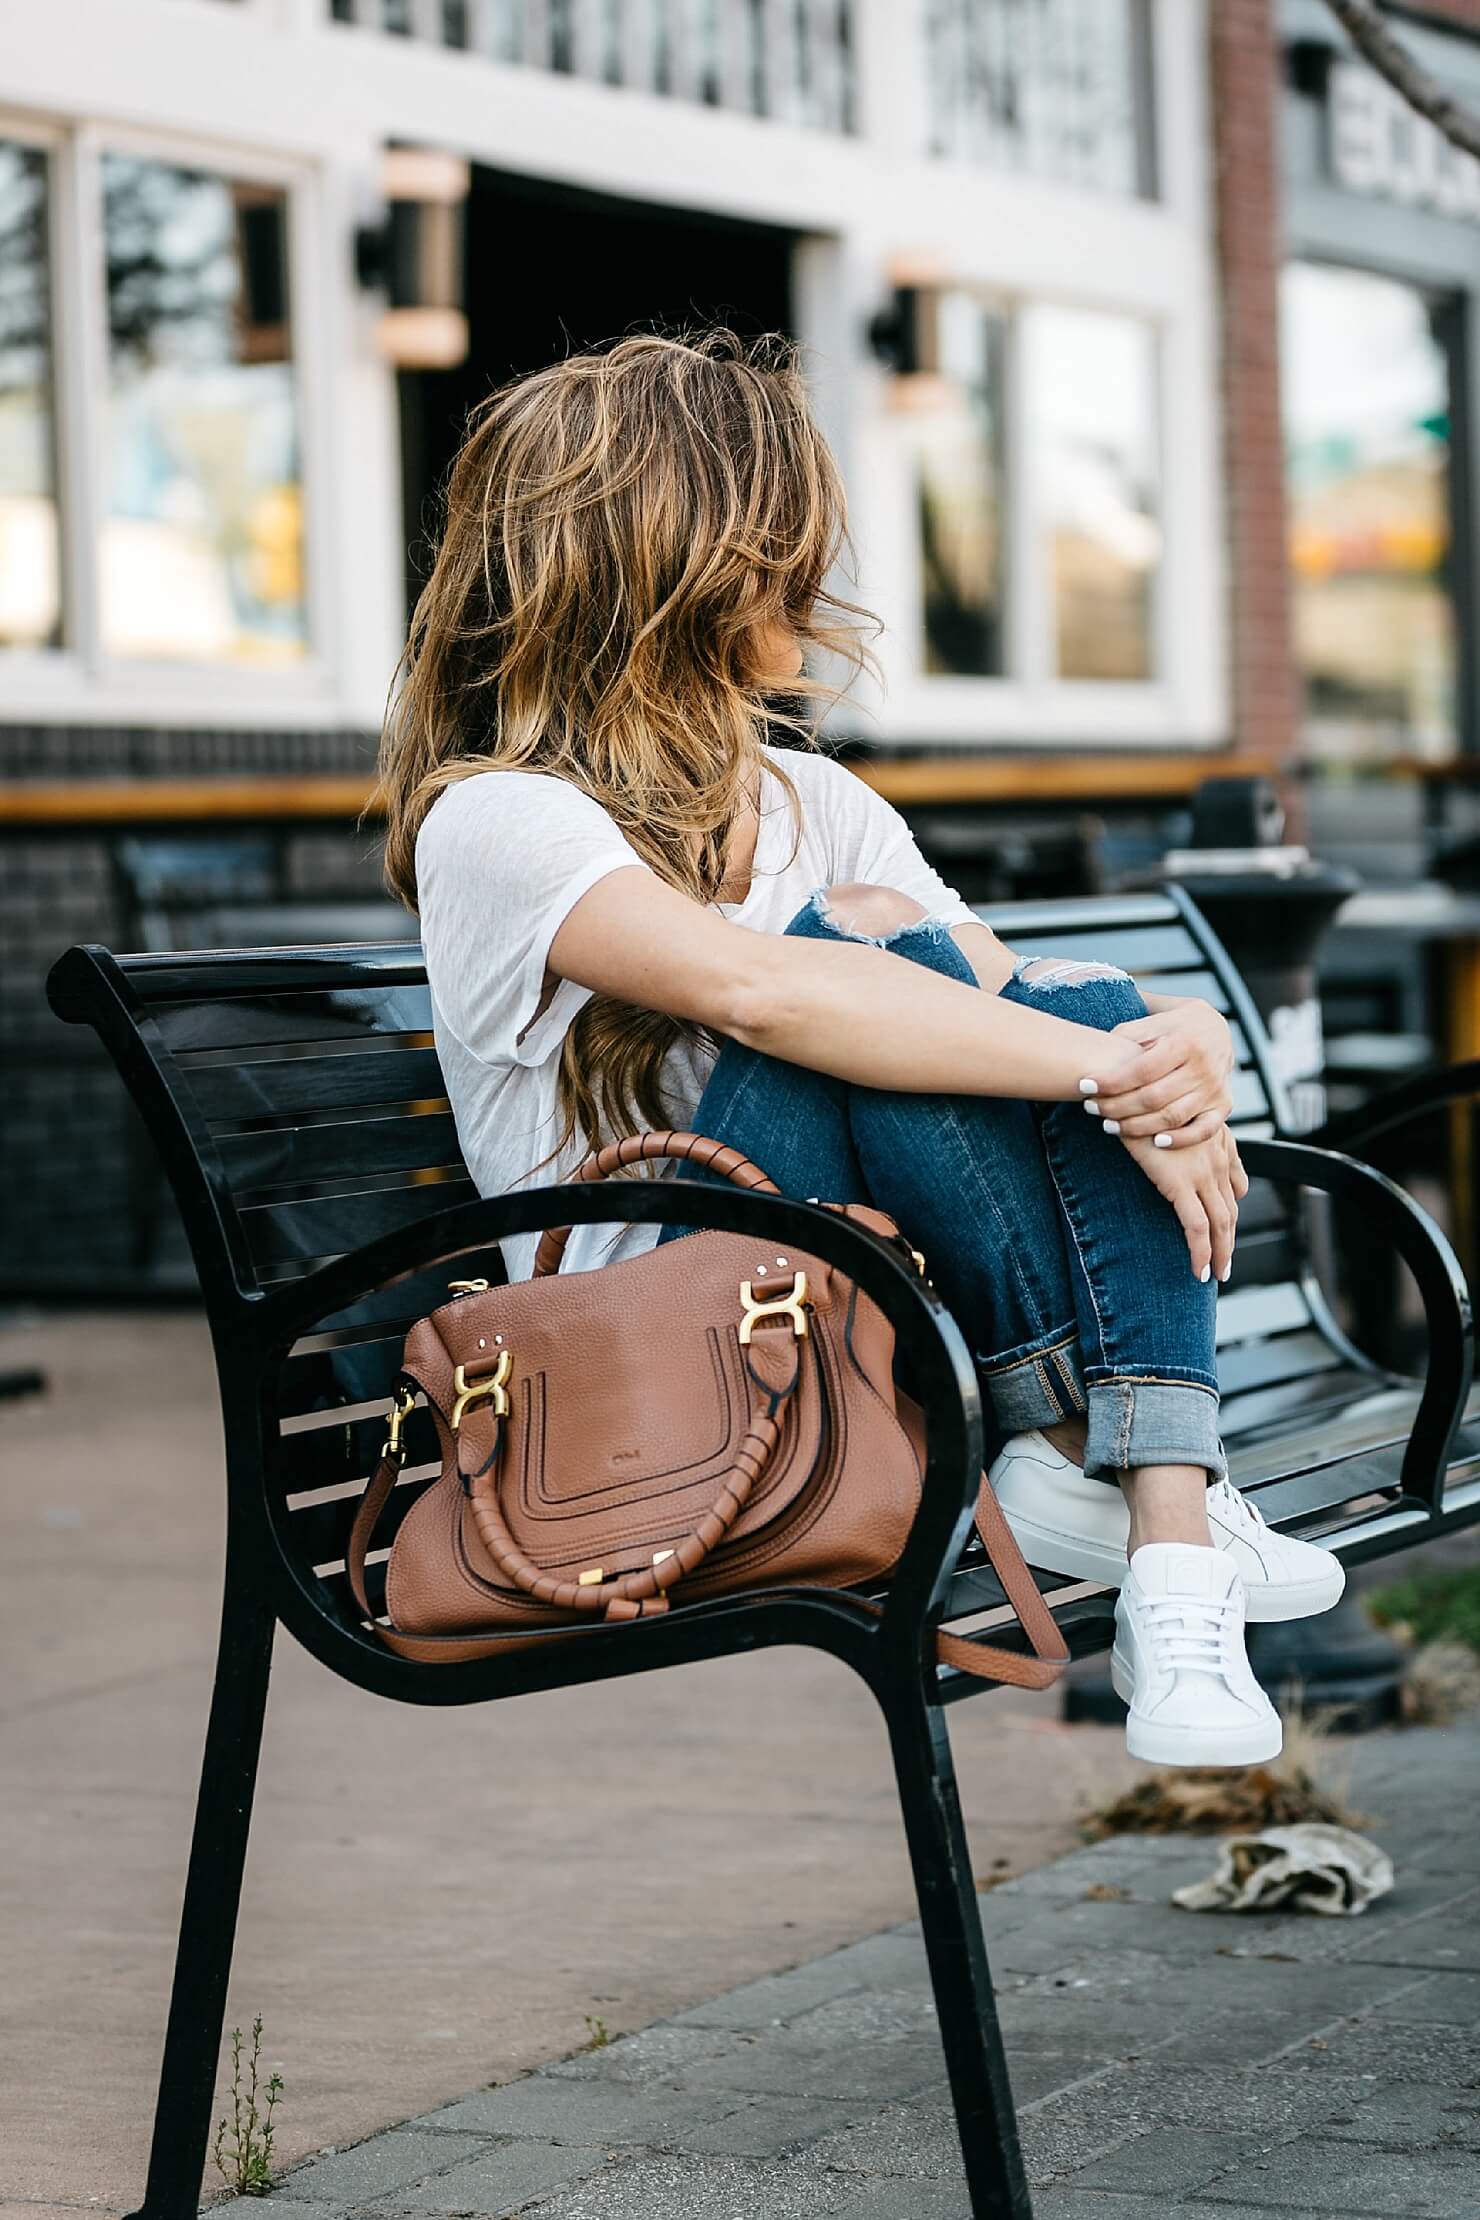 what to wear to baseball game, greats sneakers, white tee, AG distressed denim, chloe bag